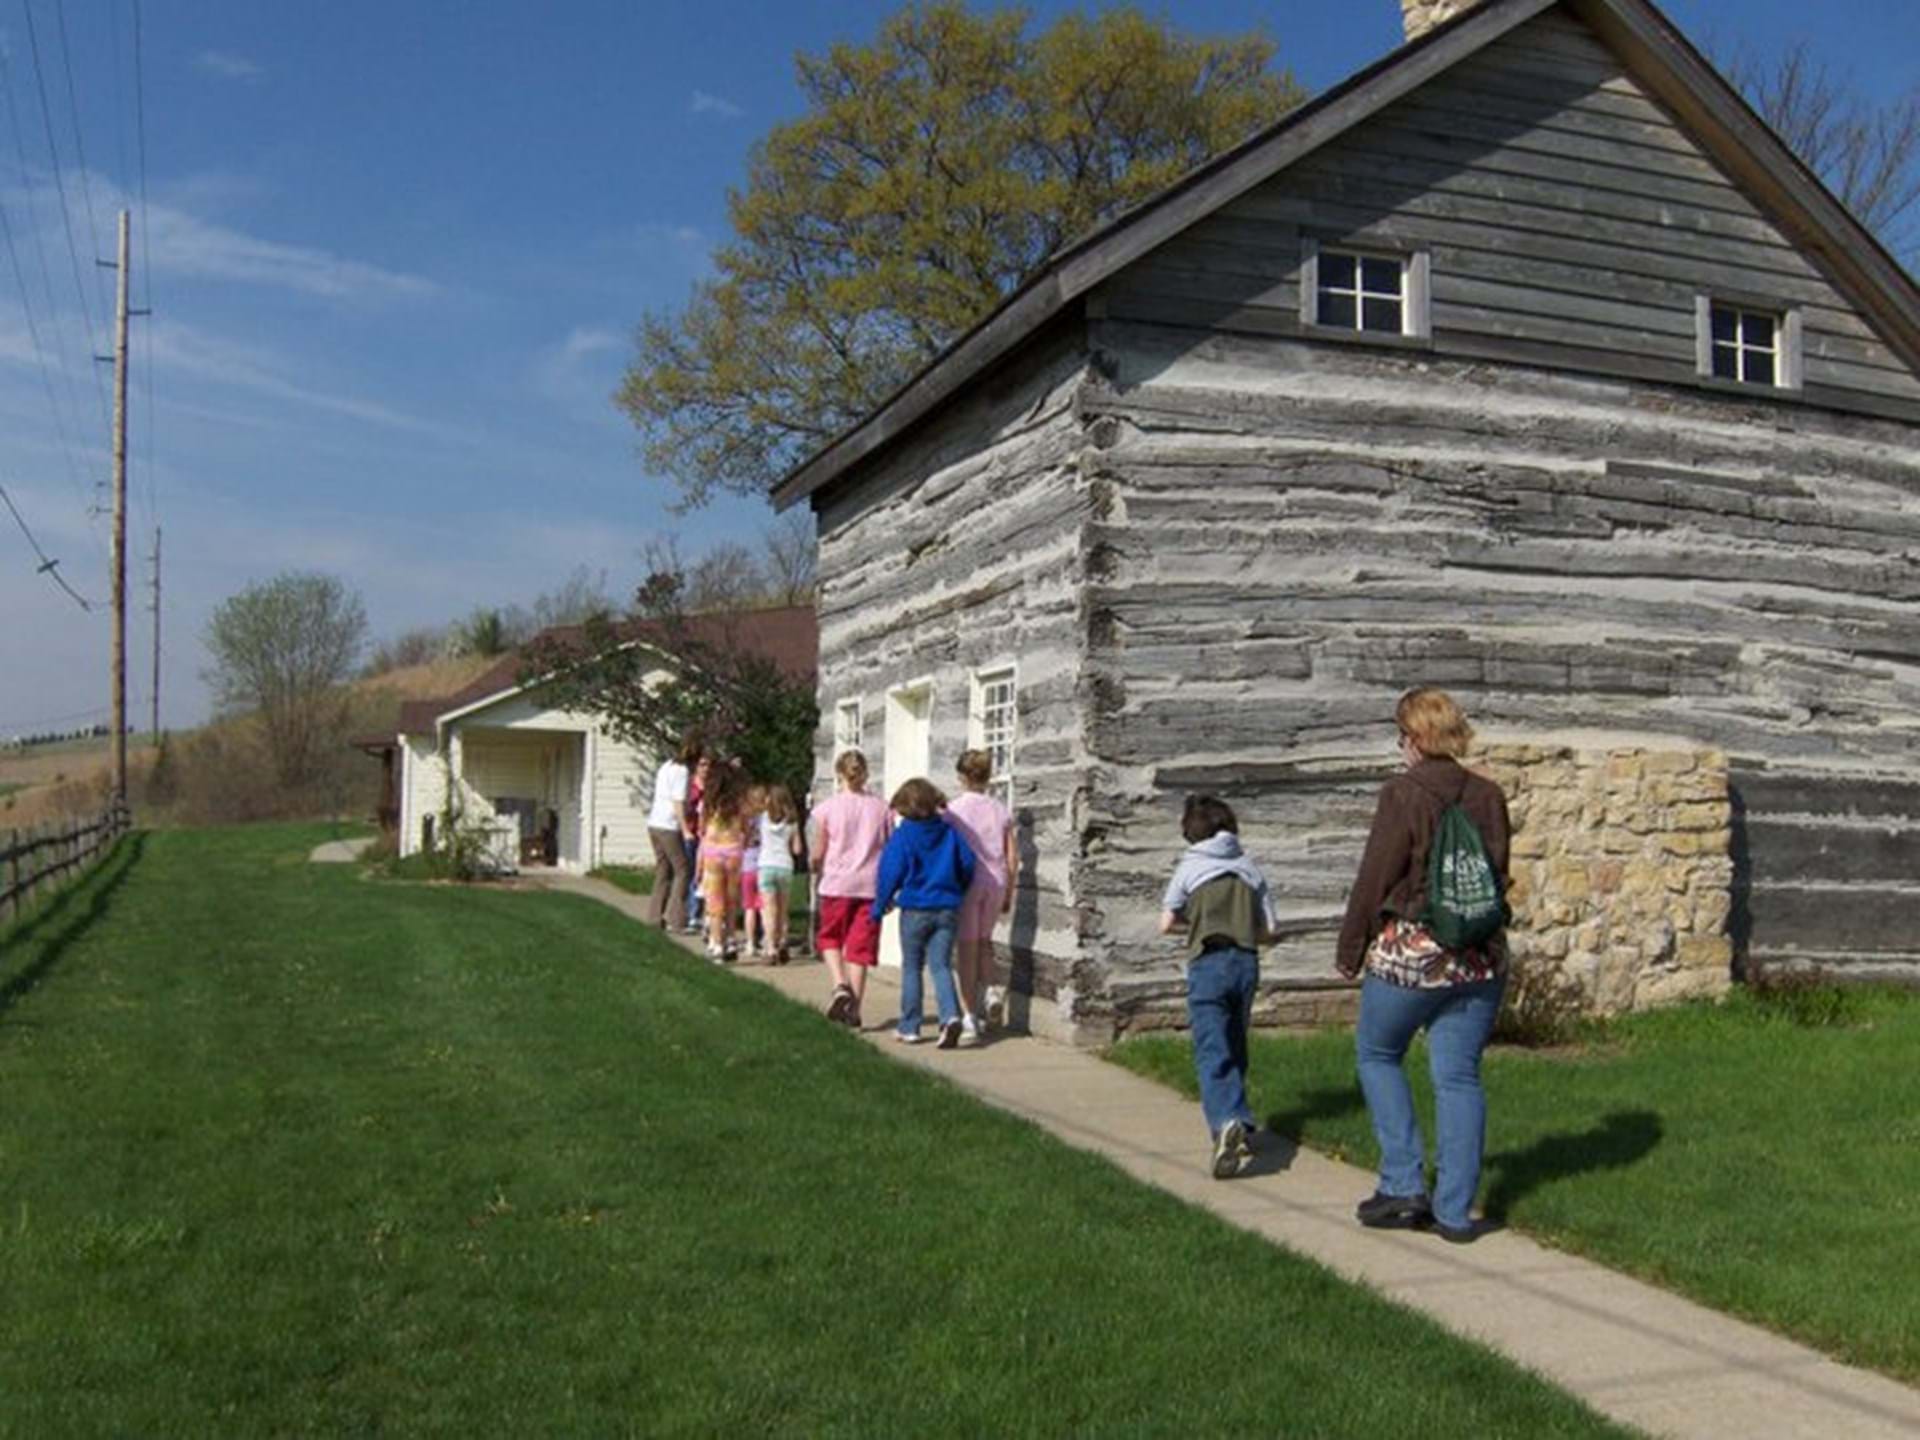 Log Cabin and general store in the village